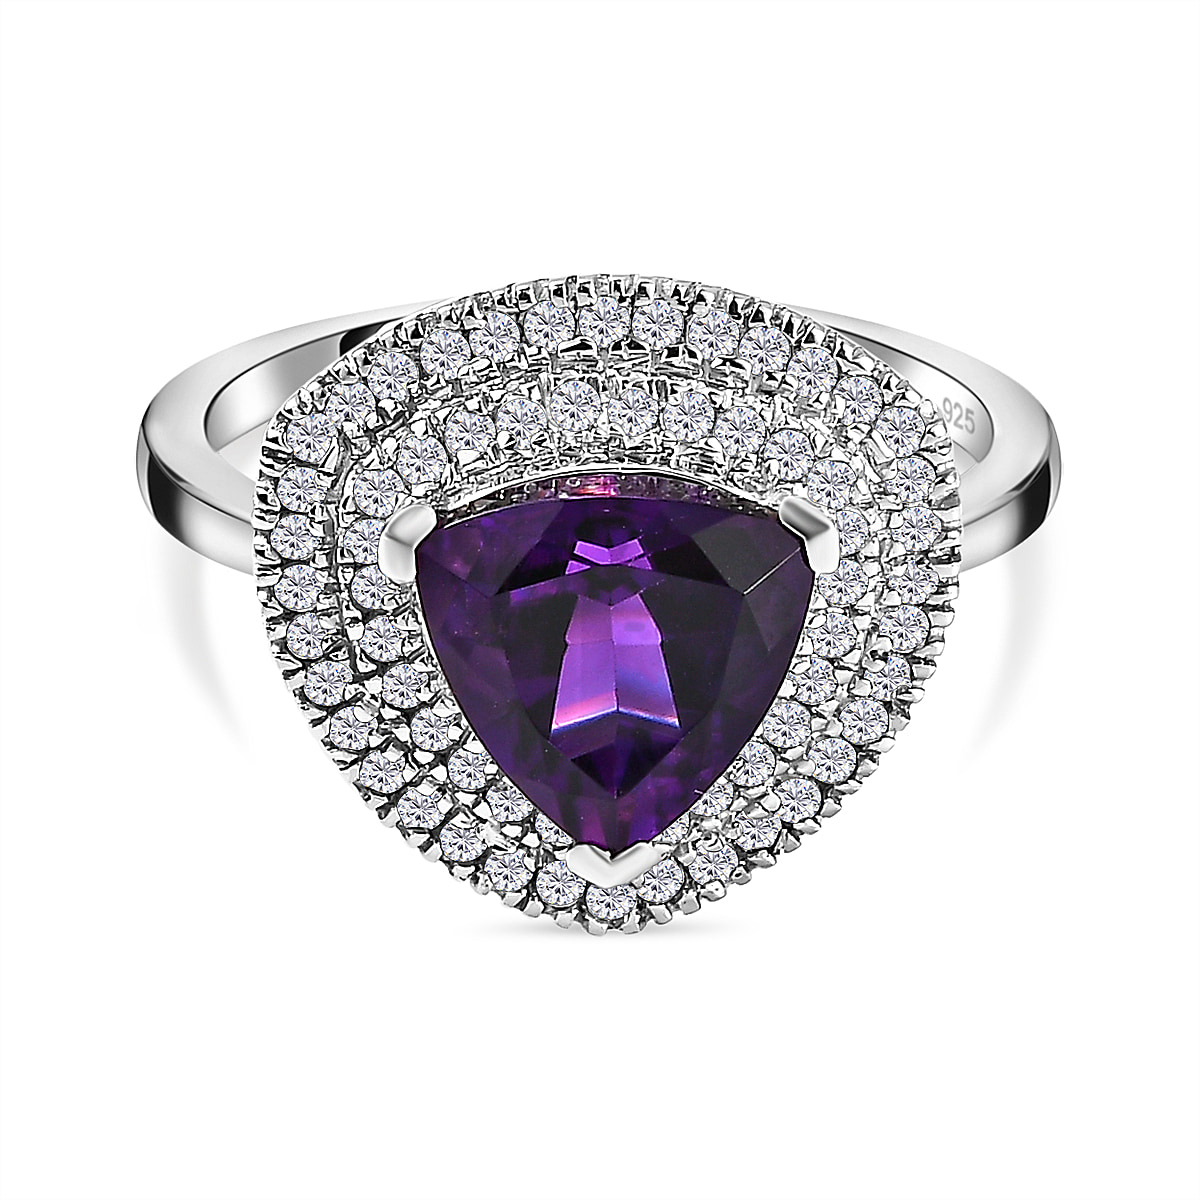 Moroccan Amethyst & Natural Zircon Halo Ring in Platinum Overlay Sterling  Silver 2.34 Ct.